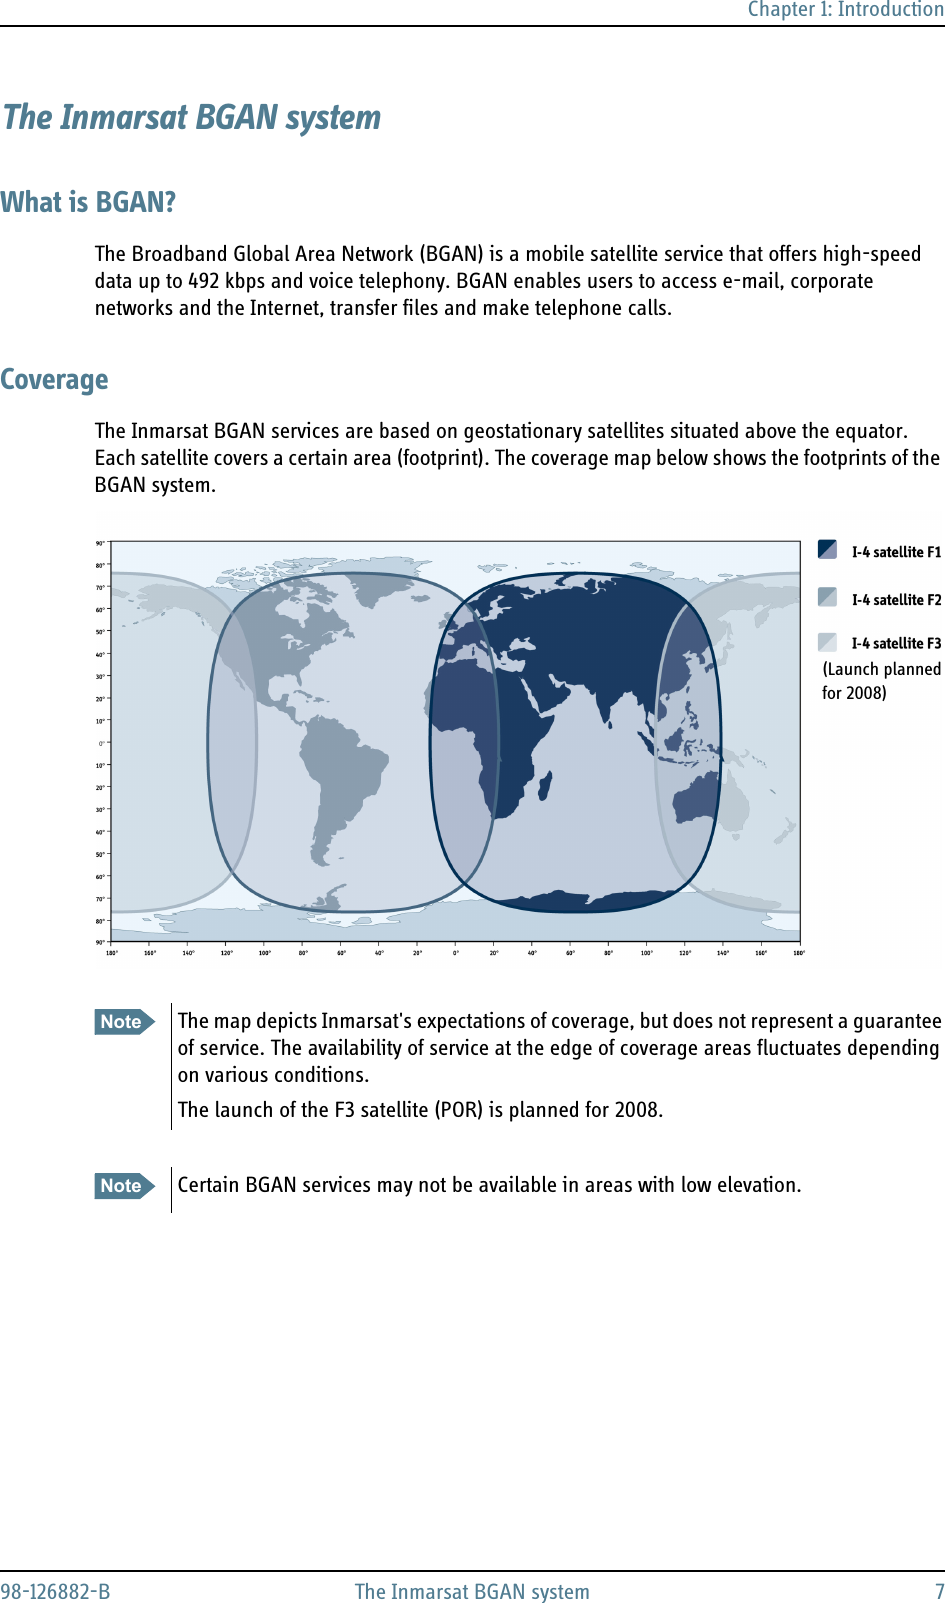 Chapter 1: Introduction98-126882-B The Inmarsat BGAN system 7The Inmarsat BGAN systemWhat is BGAN?The Broadband Global Area Network (BGAN) is a mobile satellite service that offers high-speed data up to 492 kbps and voice telephony. BGAN enables users to access e-mail, corporate networks and the Internet, transfer files and make telephone calls.CoverageThe Inmarsat BGAN services are based on geostationary satellites situated above the equator. Each satellite covers a certain area (footprint). The coverage map below shows the footprints of the BGAN system.Note The map depicts Inmarsat&apos;s expectations of coverage, but does not represent a guarantee of service. The availability of service at the edge of coverage areas fluctuates depending on various conditions.The launch of the F3 satellite (POR) is planned for 2008.Note Certain BGAN services may not be available in areas with low elevation. (Launch planned for 2008) 